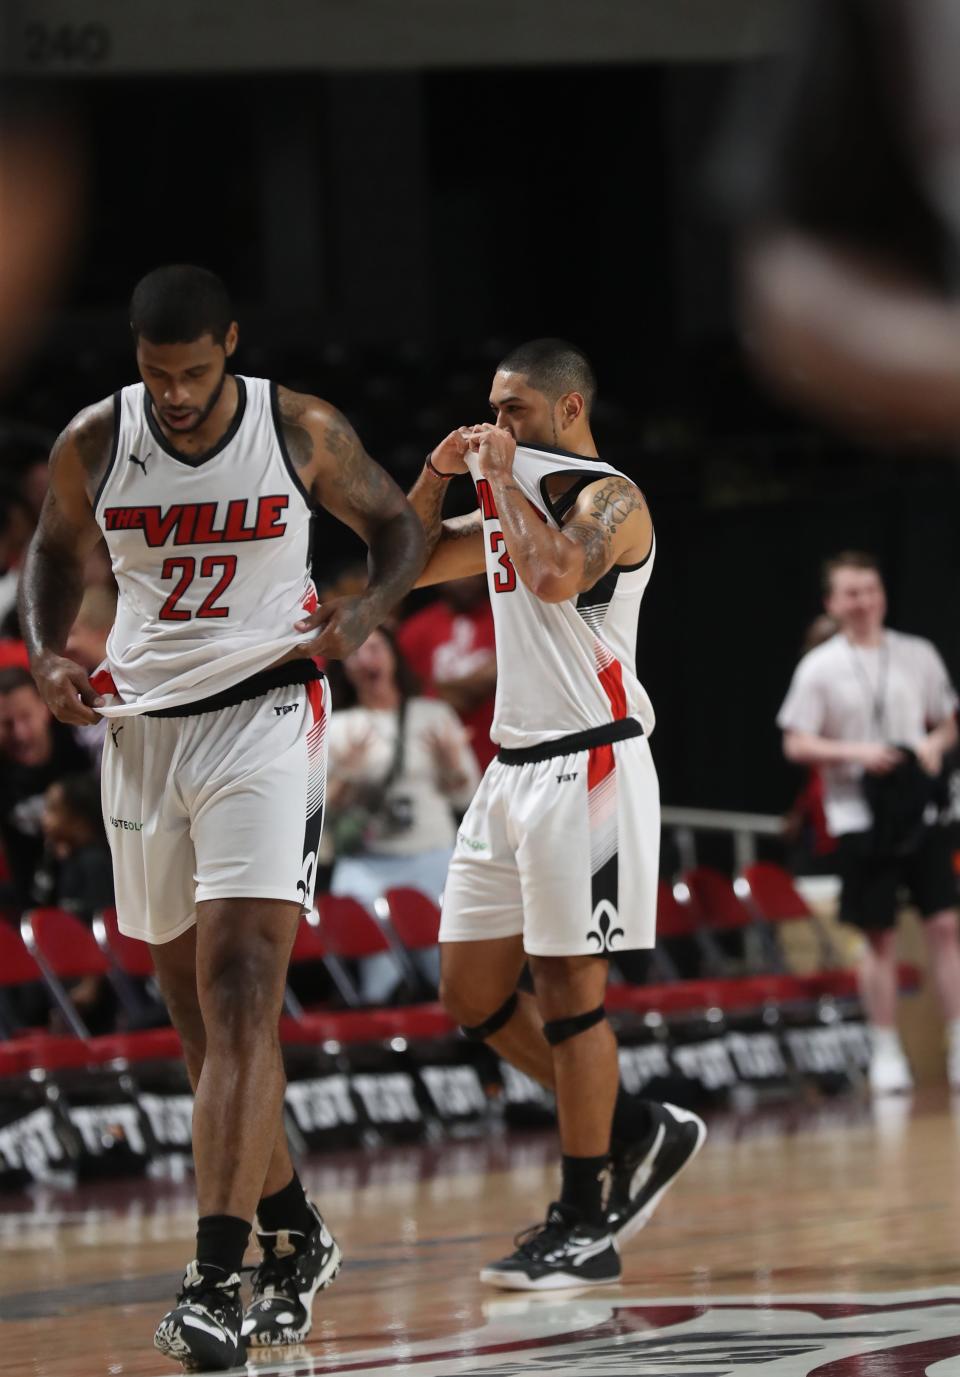 The Ville's Peyton Siva and Chane Behanan walked off the court after losing to the Gutter Cats in The Basketball Tournament in Freedom Hall.
July 29, 2023